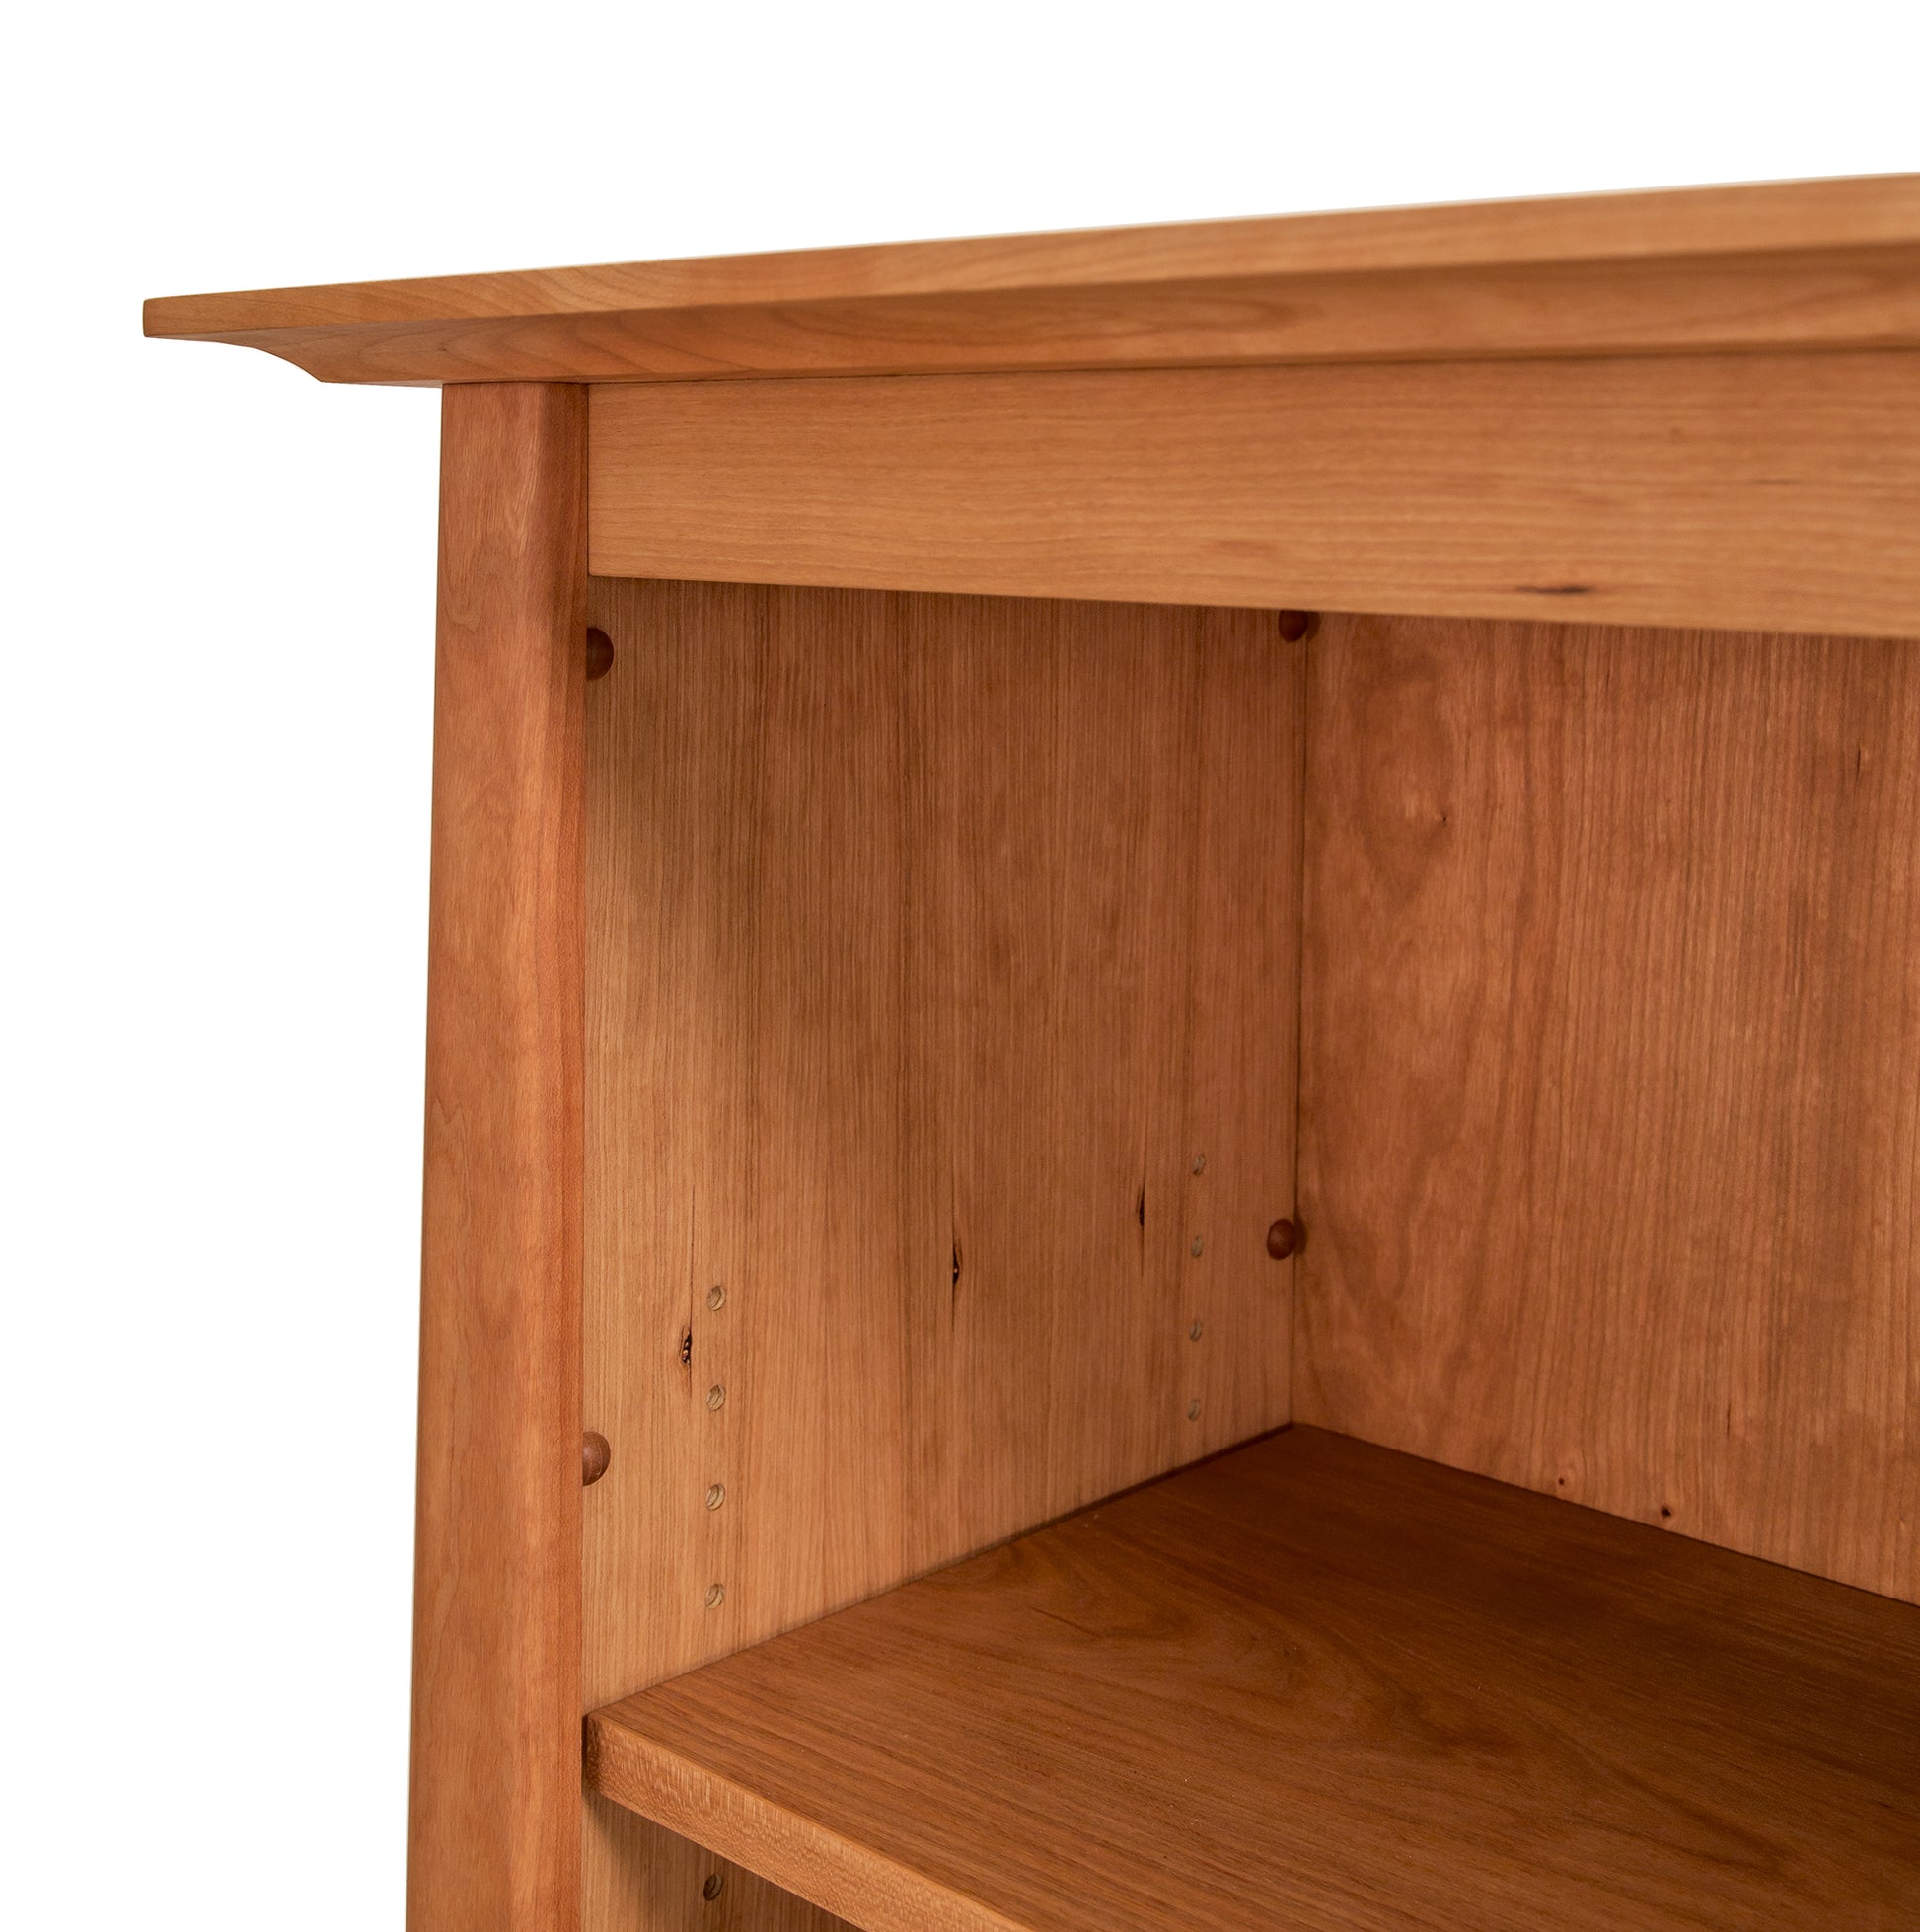 Corner view of a simple wooden Cherry Moon Bookcase from Maple Corner Woodworks, made from sustainably harvested hardwoods, showcasing its texture and construction details.